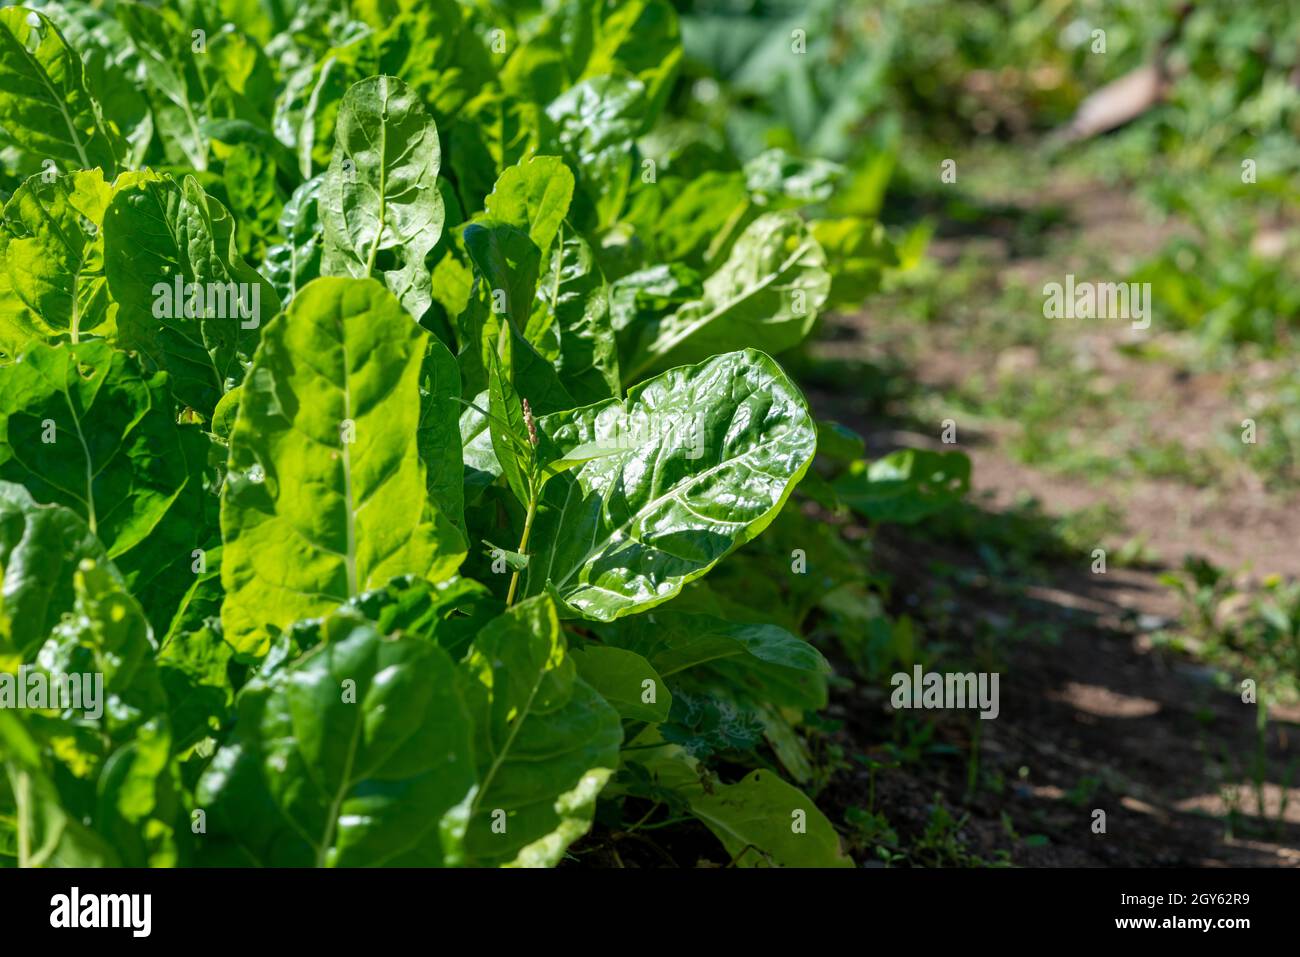 Large healthy raw heads of organic romaine lettuce growing in a garden on a farm. It has vibrant green crispy leaves. The sun is shining on the lush Stock Photo